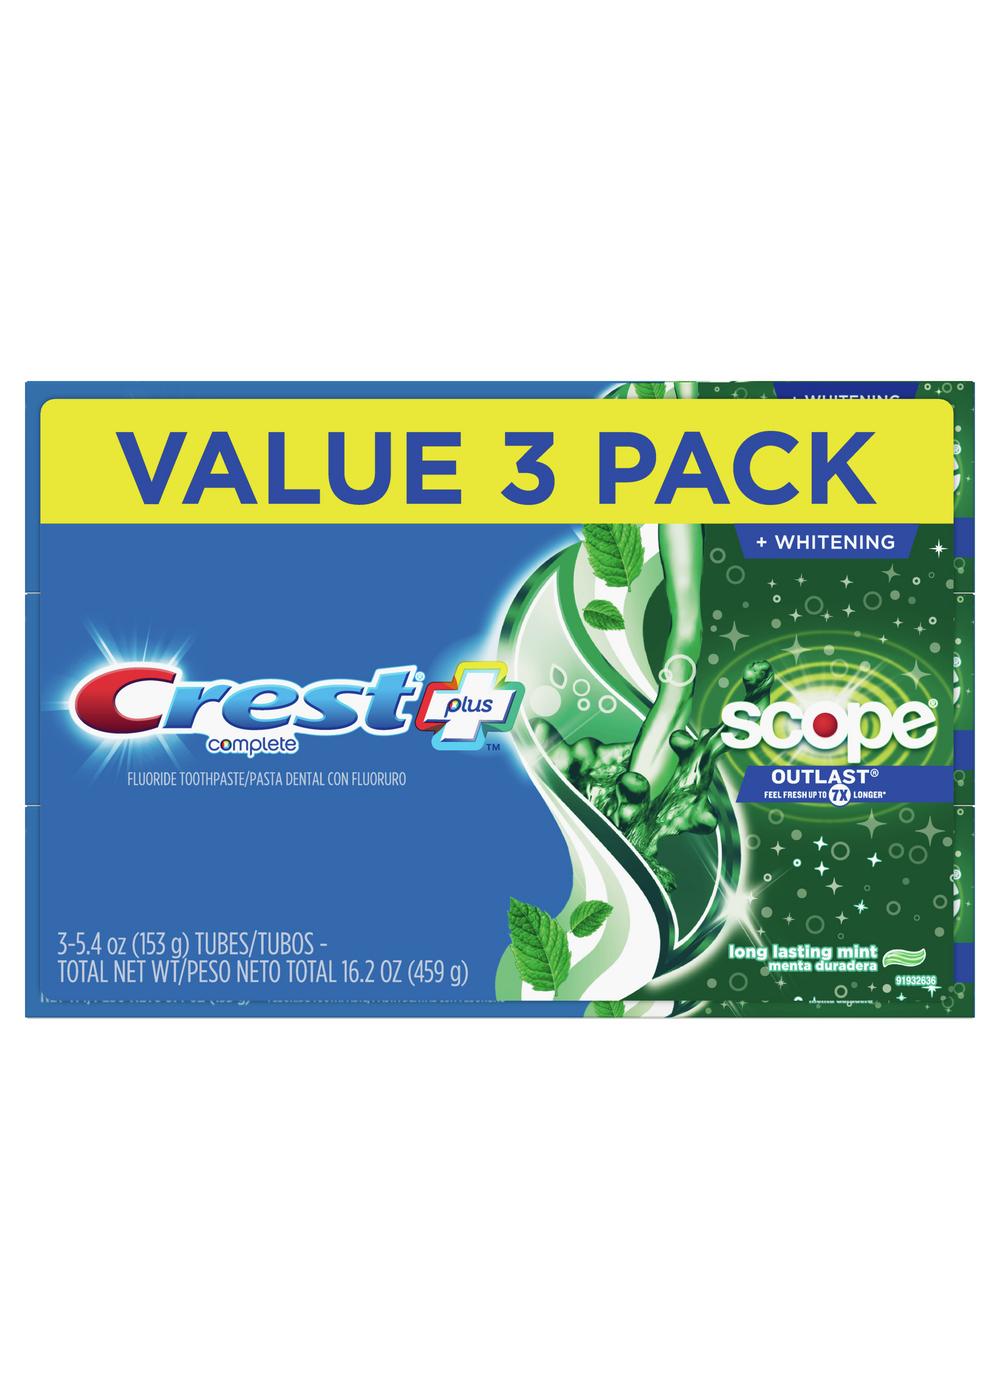 Crest Complete + Scope Outlast Whitening Toothpaste - Long Lasting Mint, 3 Pk; image 1 of 10